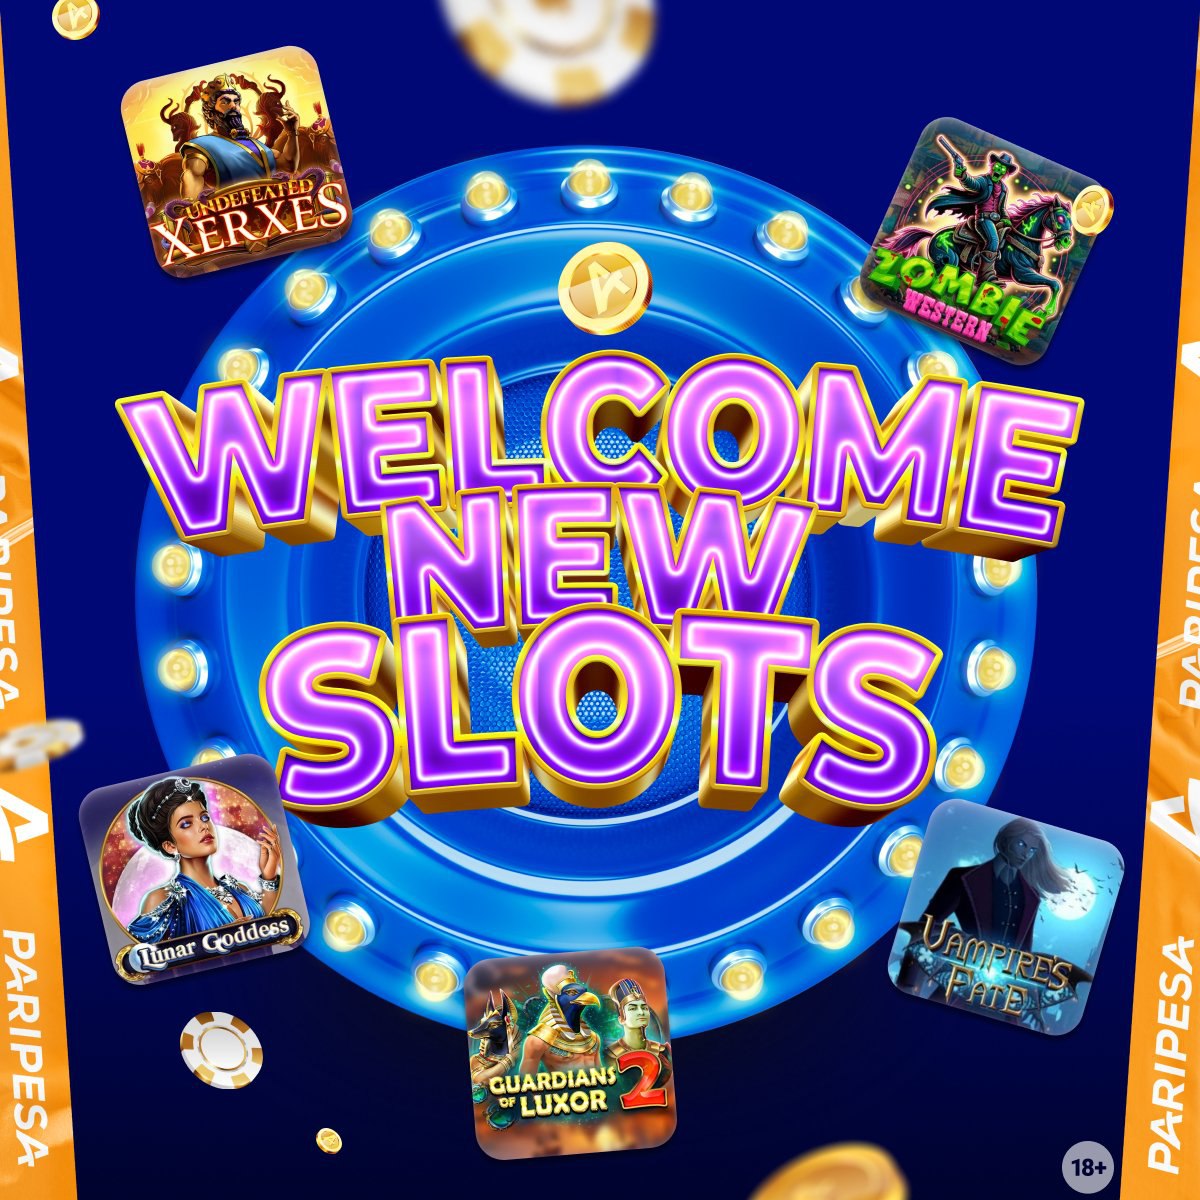 🎰 Catch a selection of adventures in the world of slot machines!

⚔ Guardians of Luxor 2
🌹 Vampire's Fate
⚡ Lunar Goddess
☄ Undefeated Xerxes
👻 Western Zombie

📌 Don't pass by:
👉 m.paripesa.bet/p4r

#bestslots